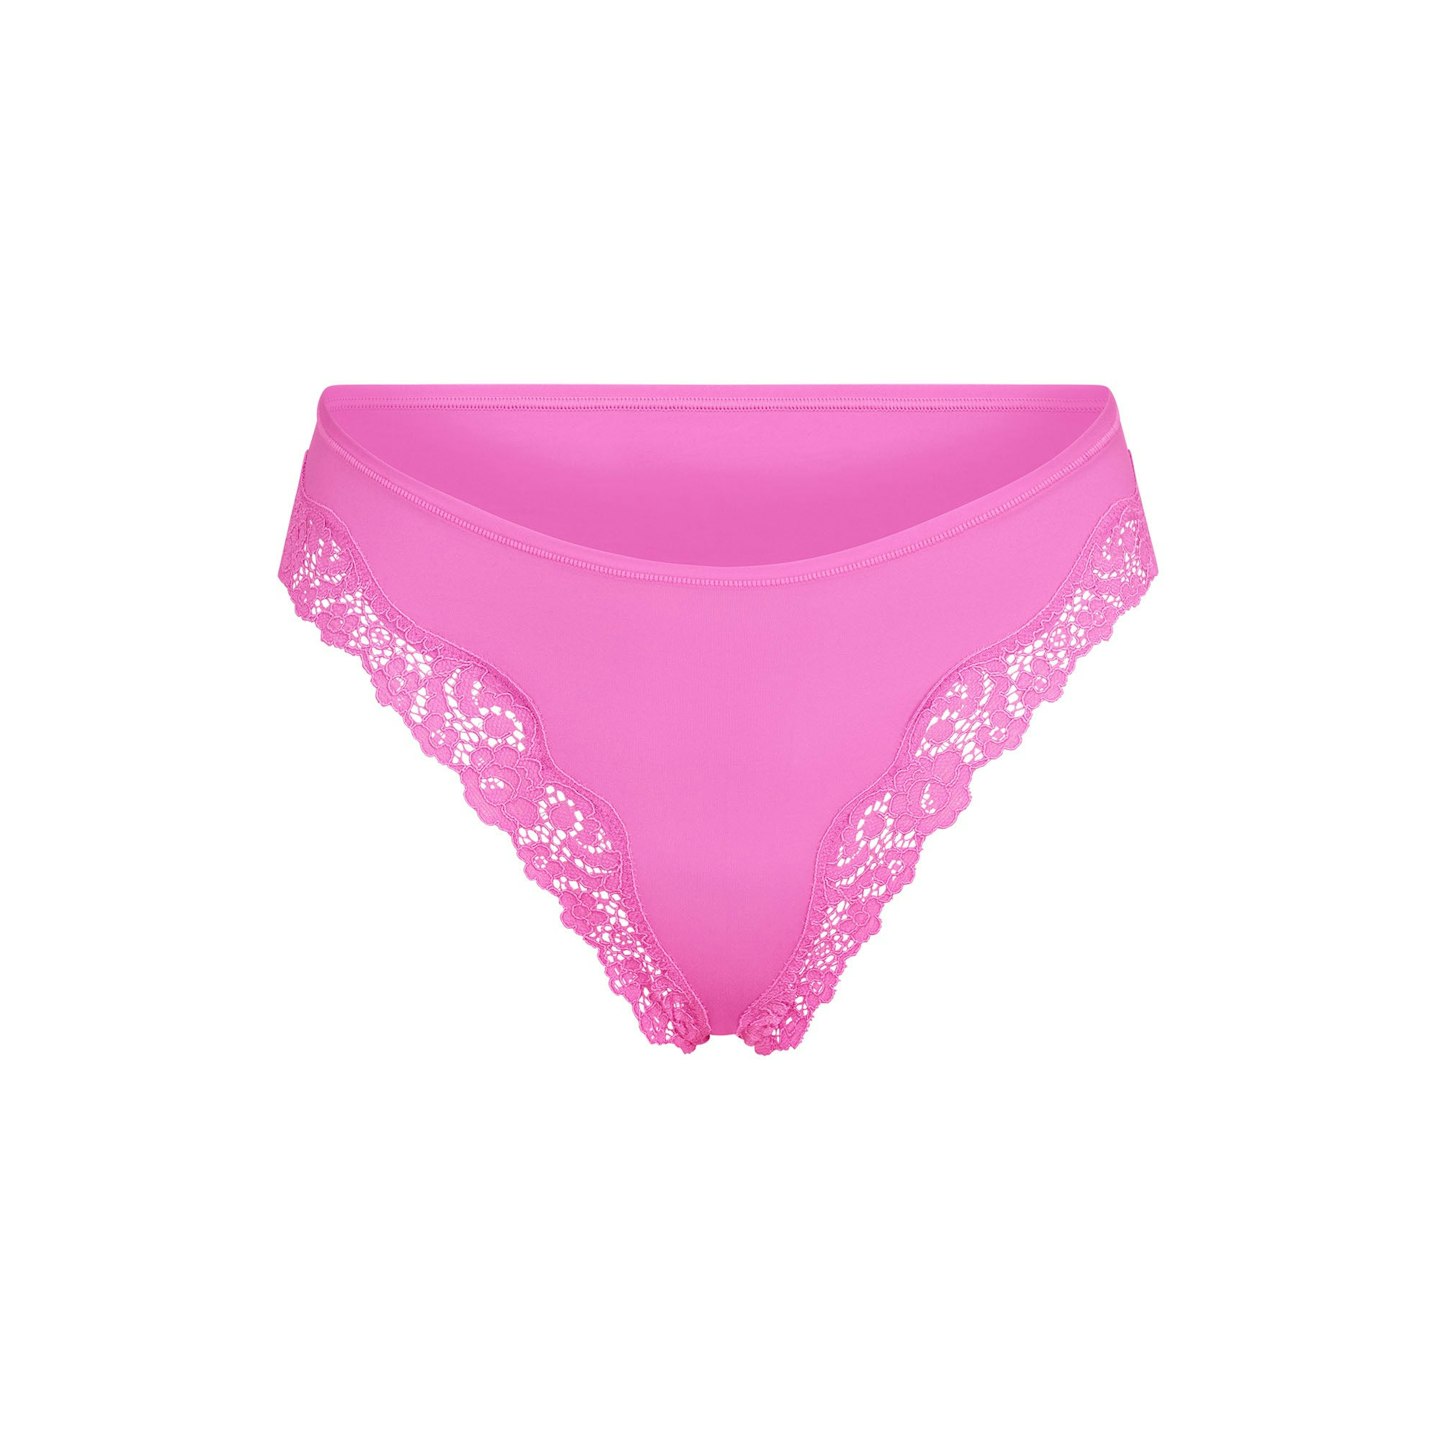 SKIMS Fits Everybody set of five thongs - Neon Pink